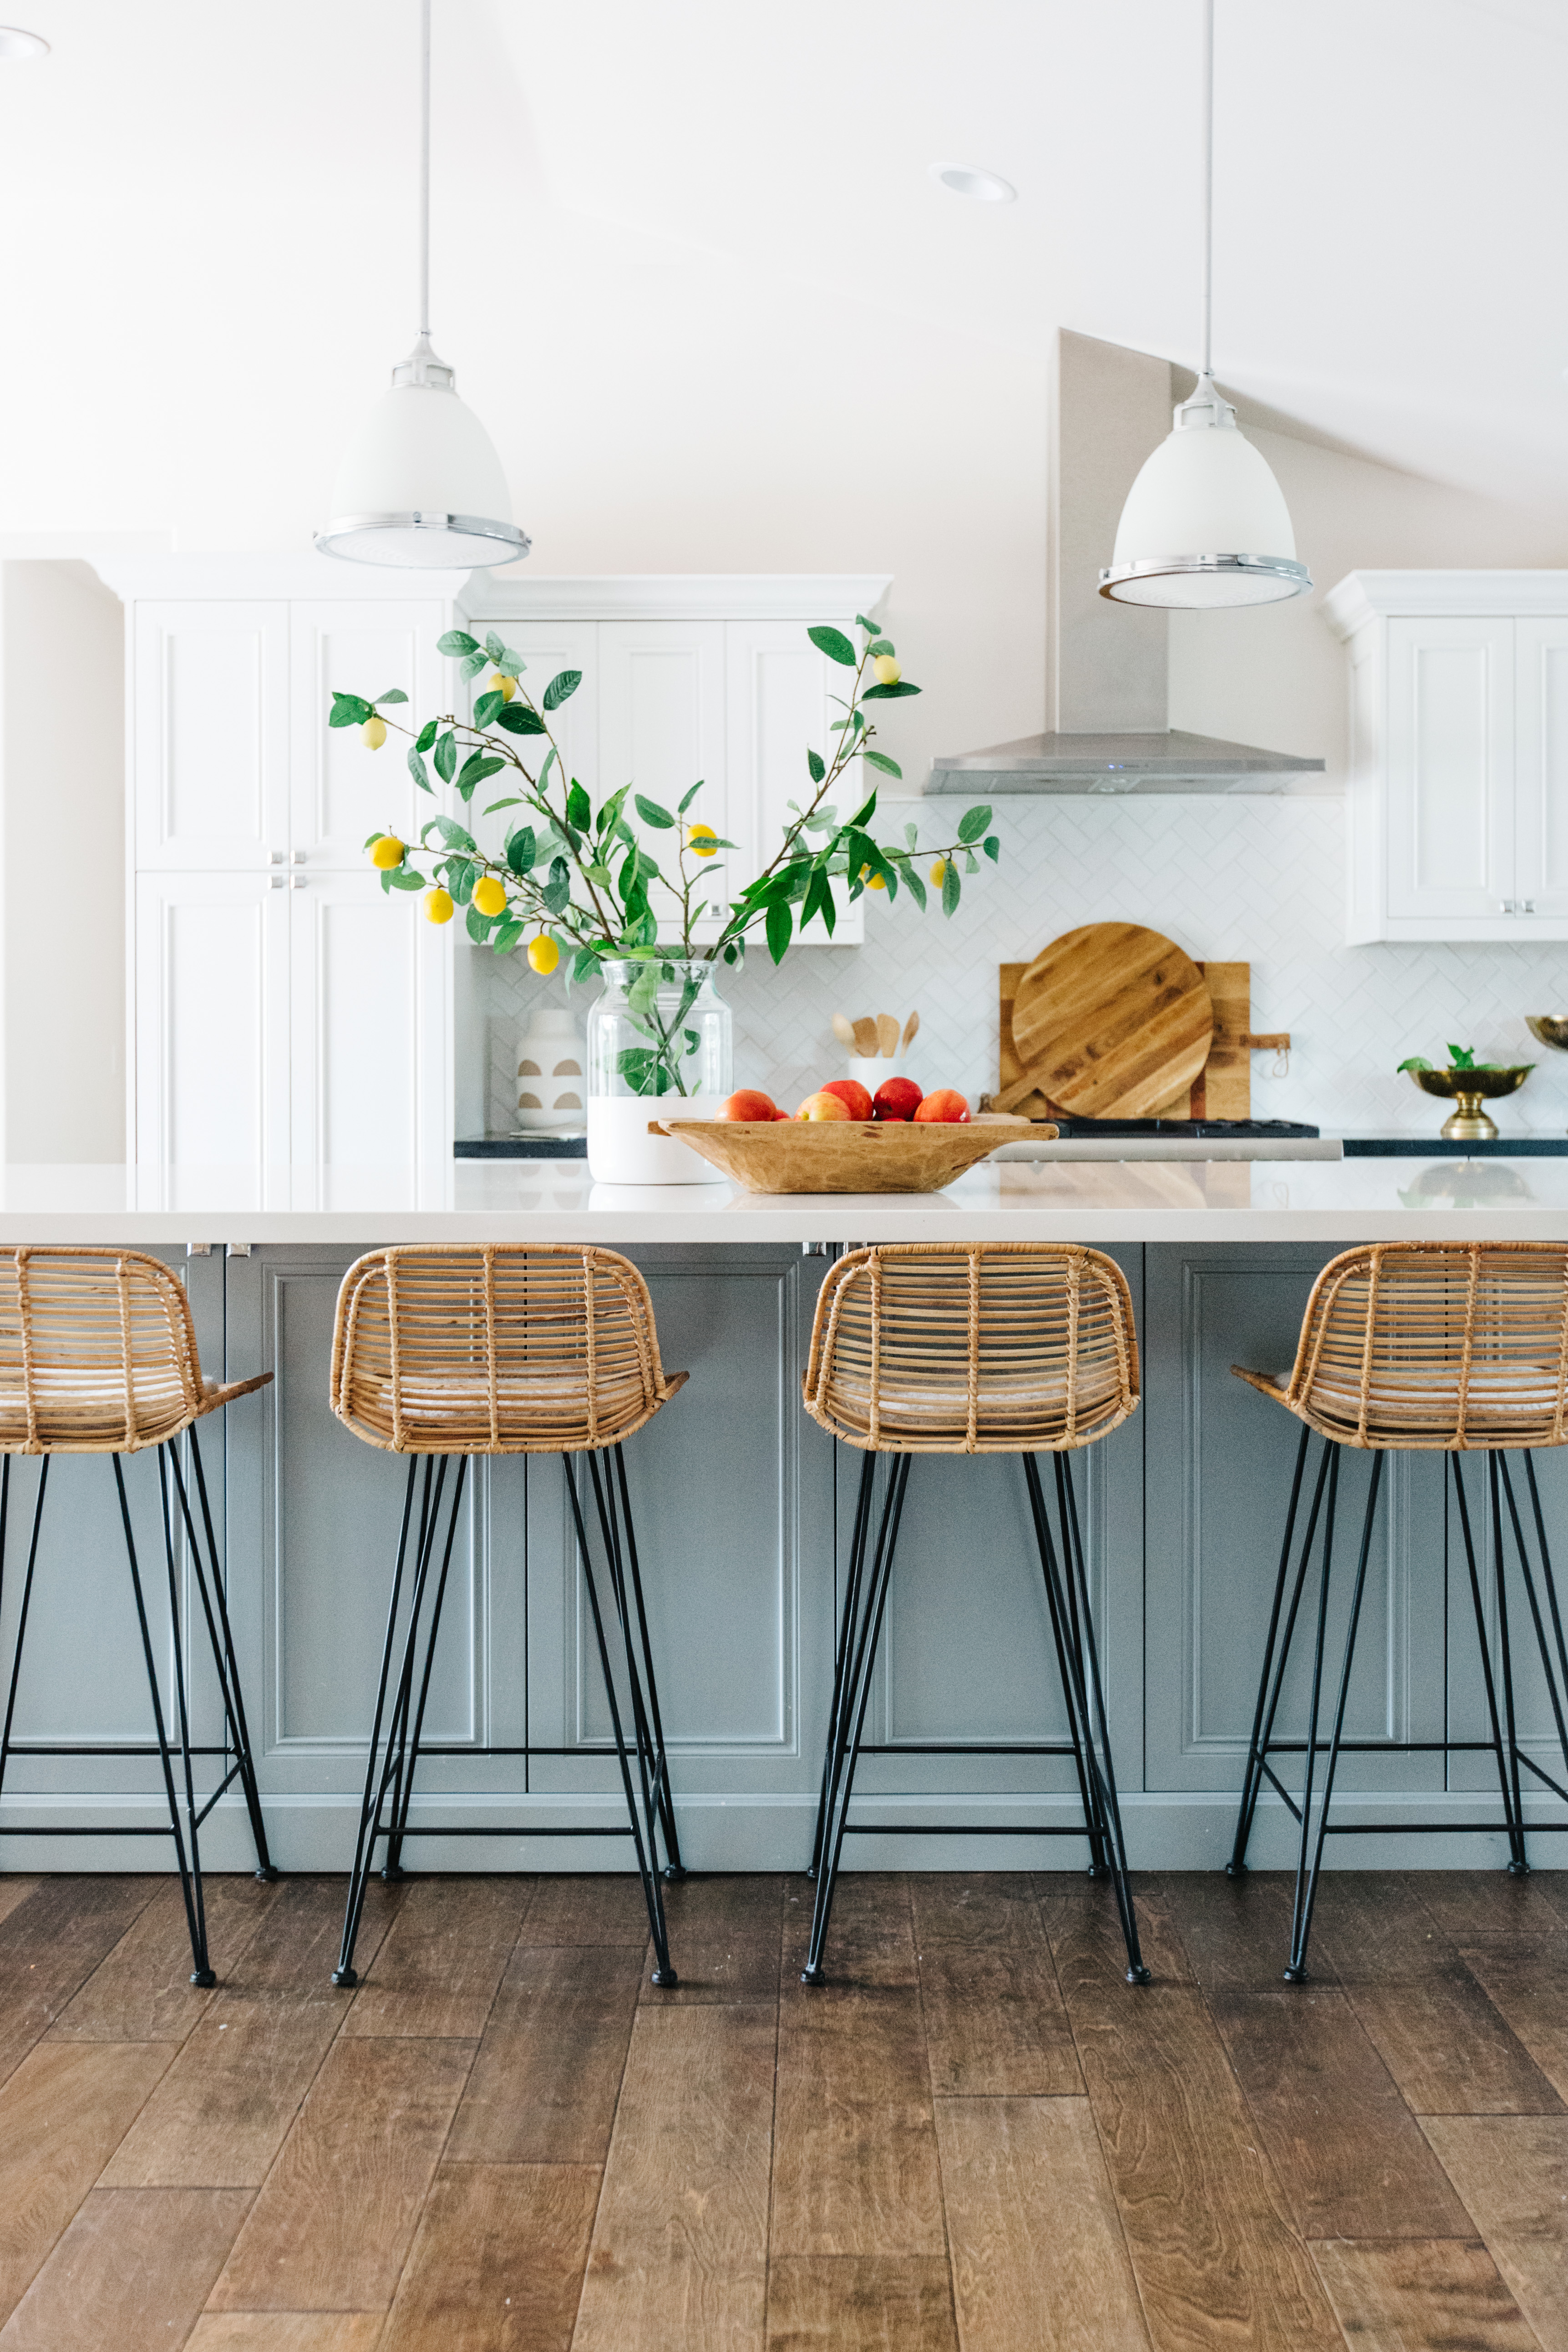 wicker barstools with a glue gray painted cabinets and white counter